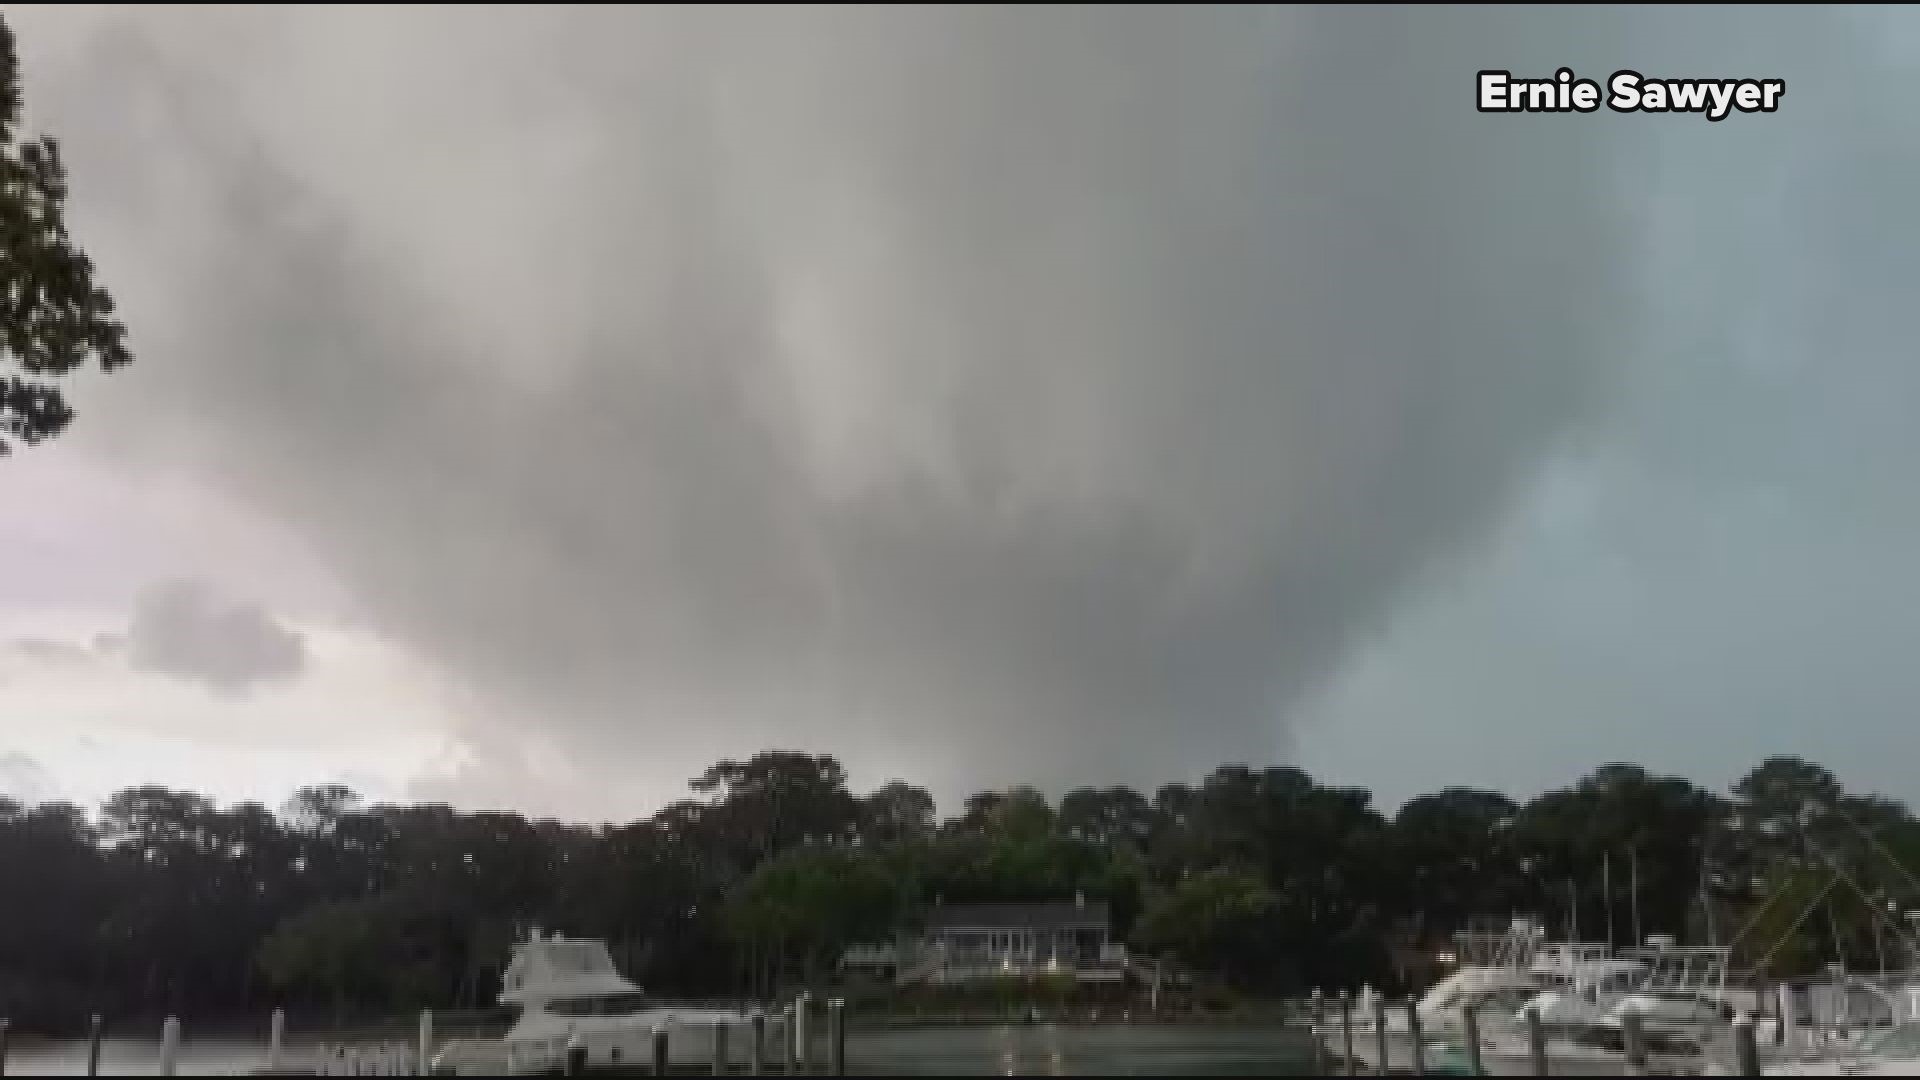 Videos show the moment a tornado formed over the Great Neck area of Virginia Beach.